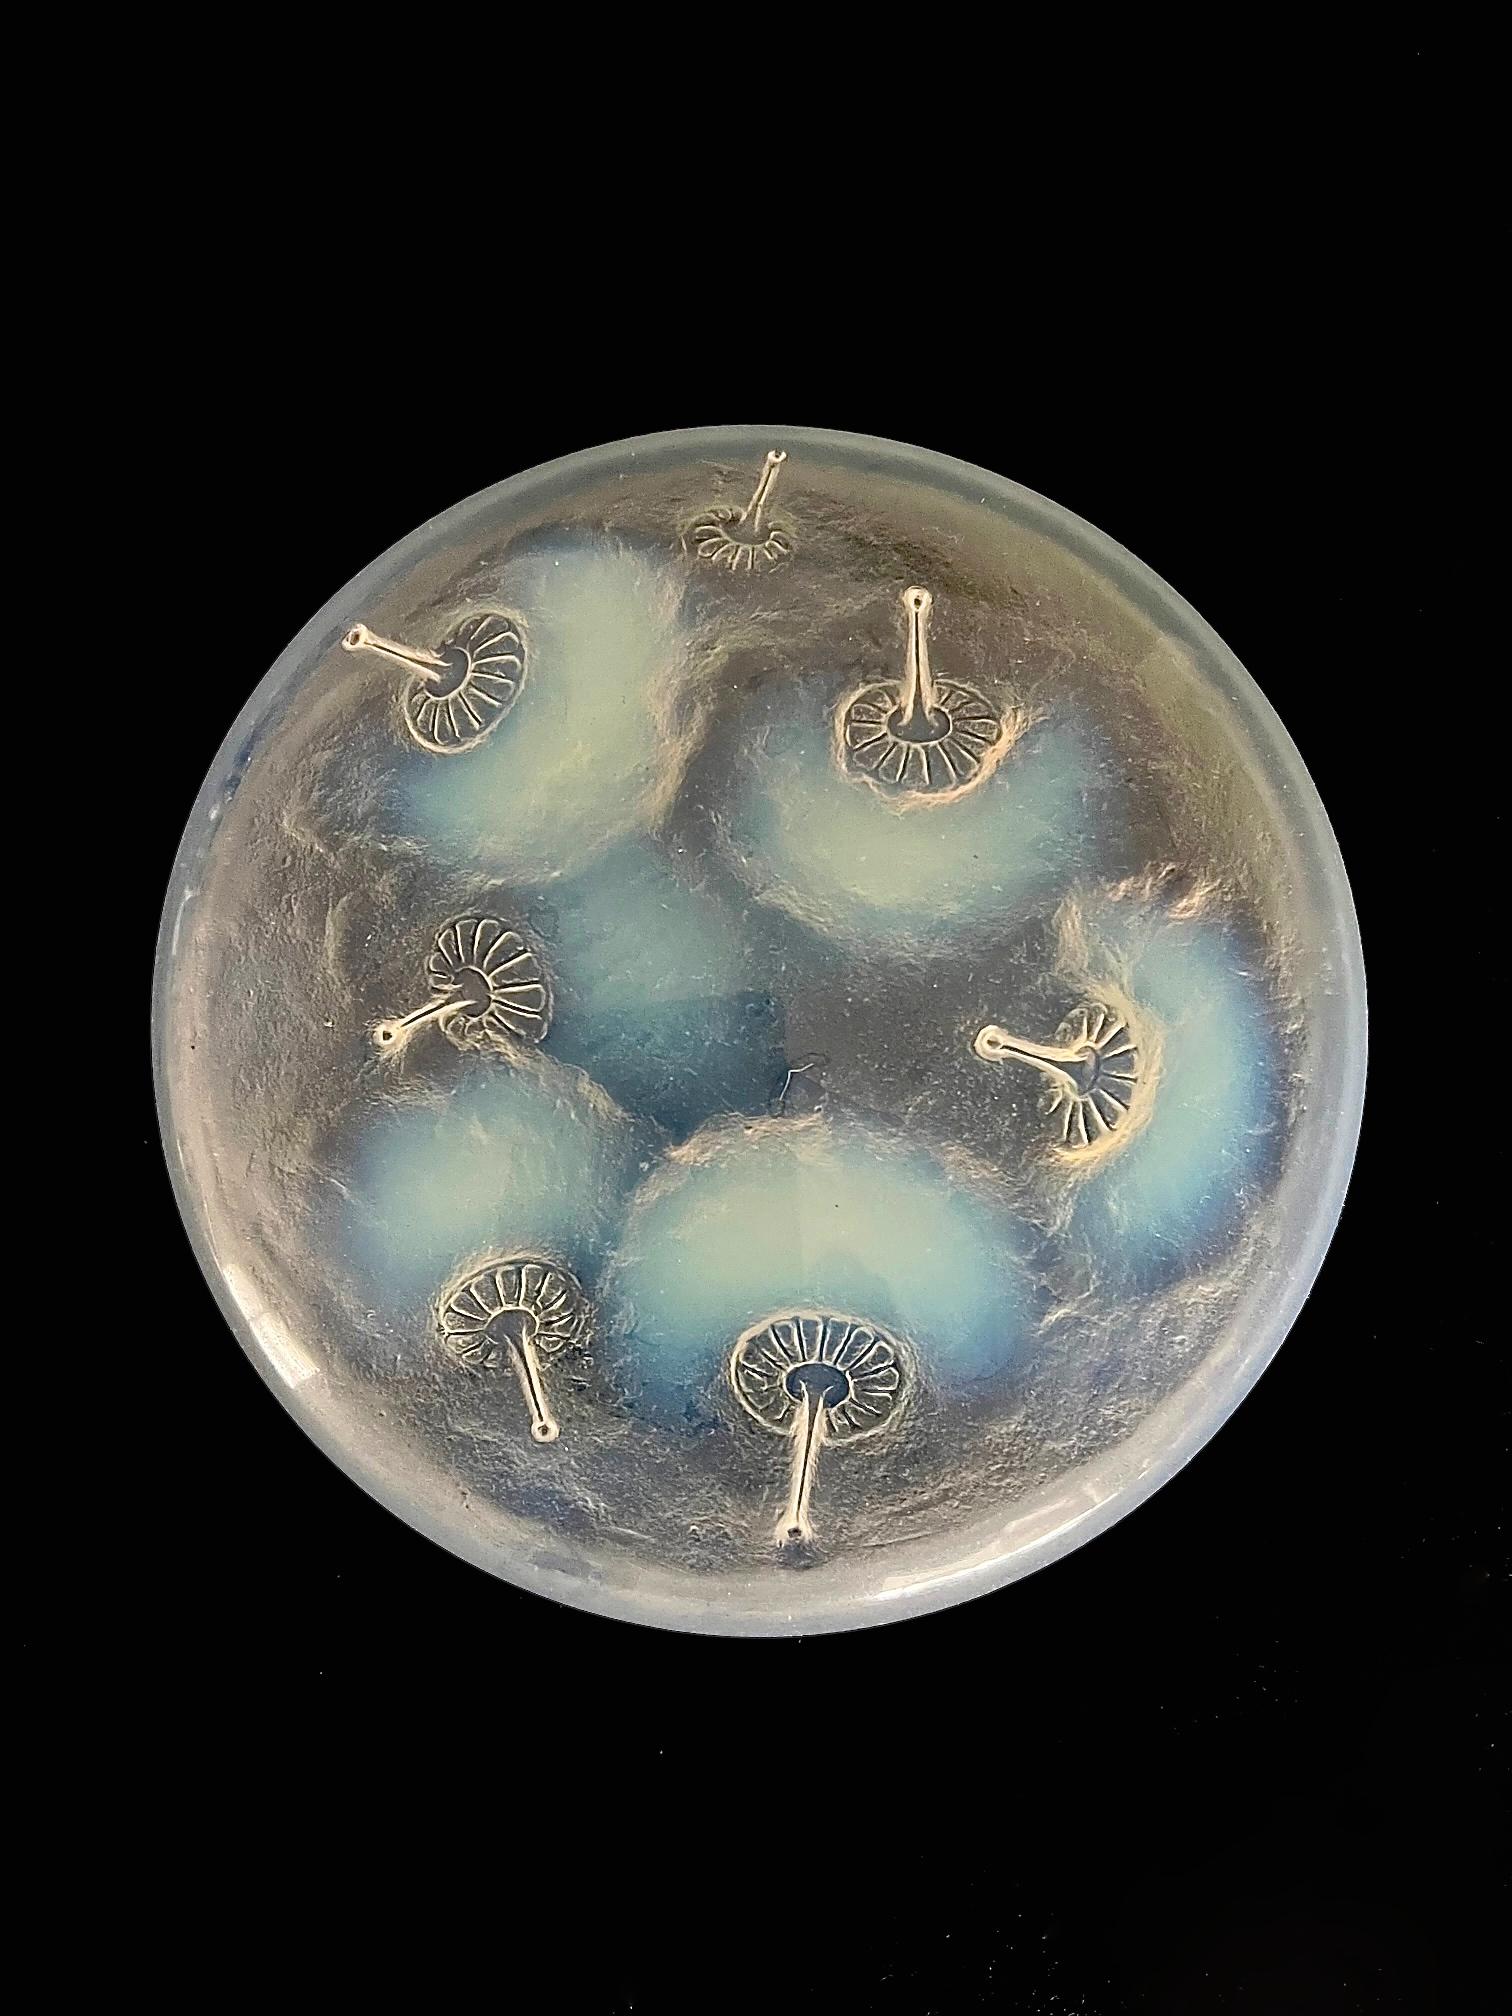 A René Lalique 'Houppes' Art Deco Opalescent glass powder box & cover moulded in relief on the underside of the lid with a design of swan-down powder puffs. 
Moulded mark 